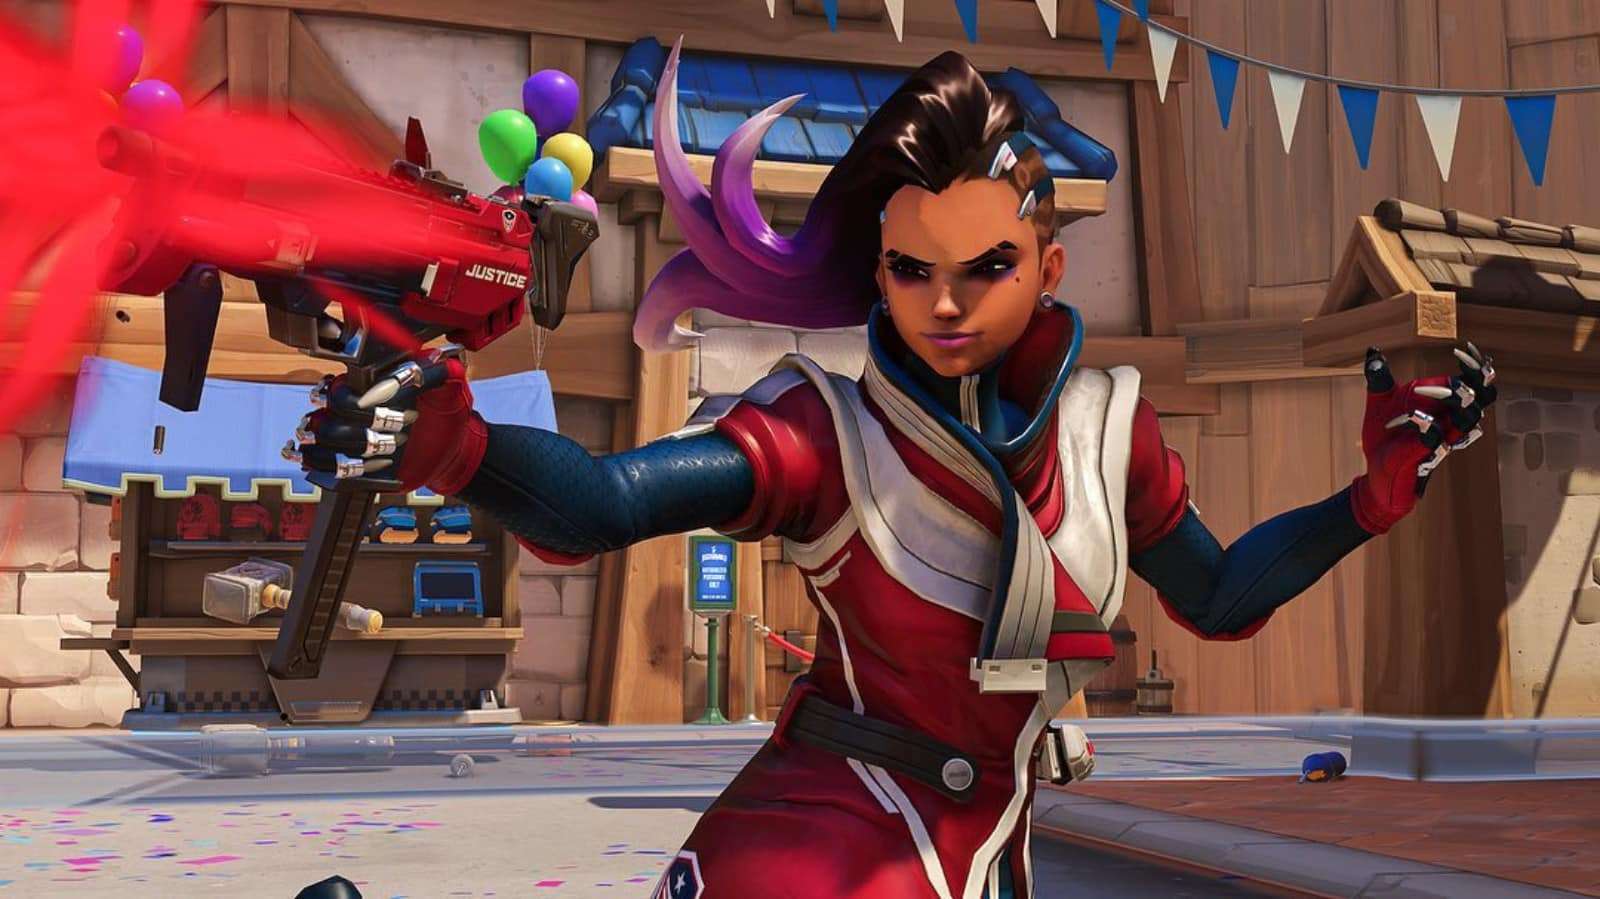 Sombra fires weapon on Blizzard World